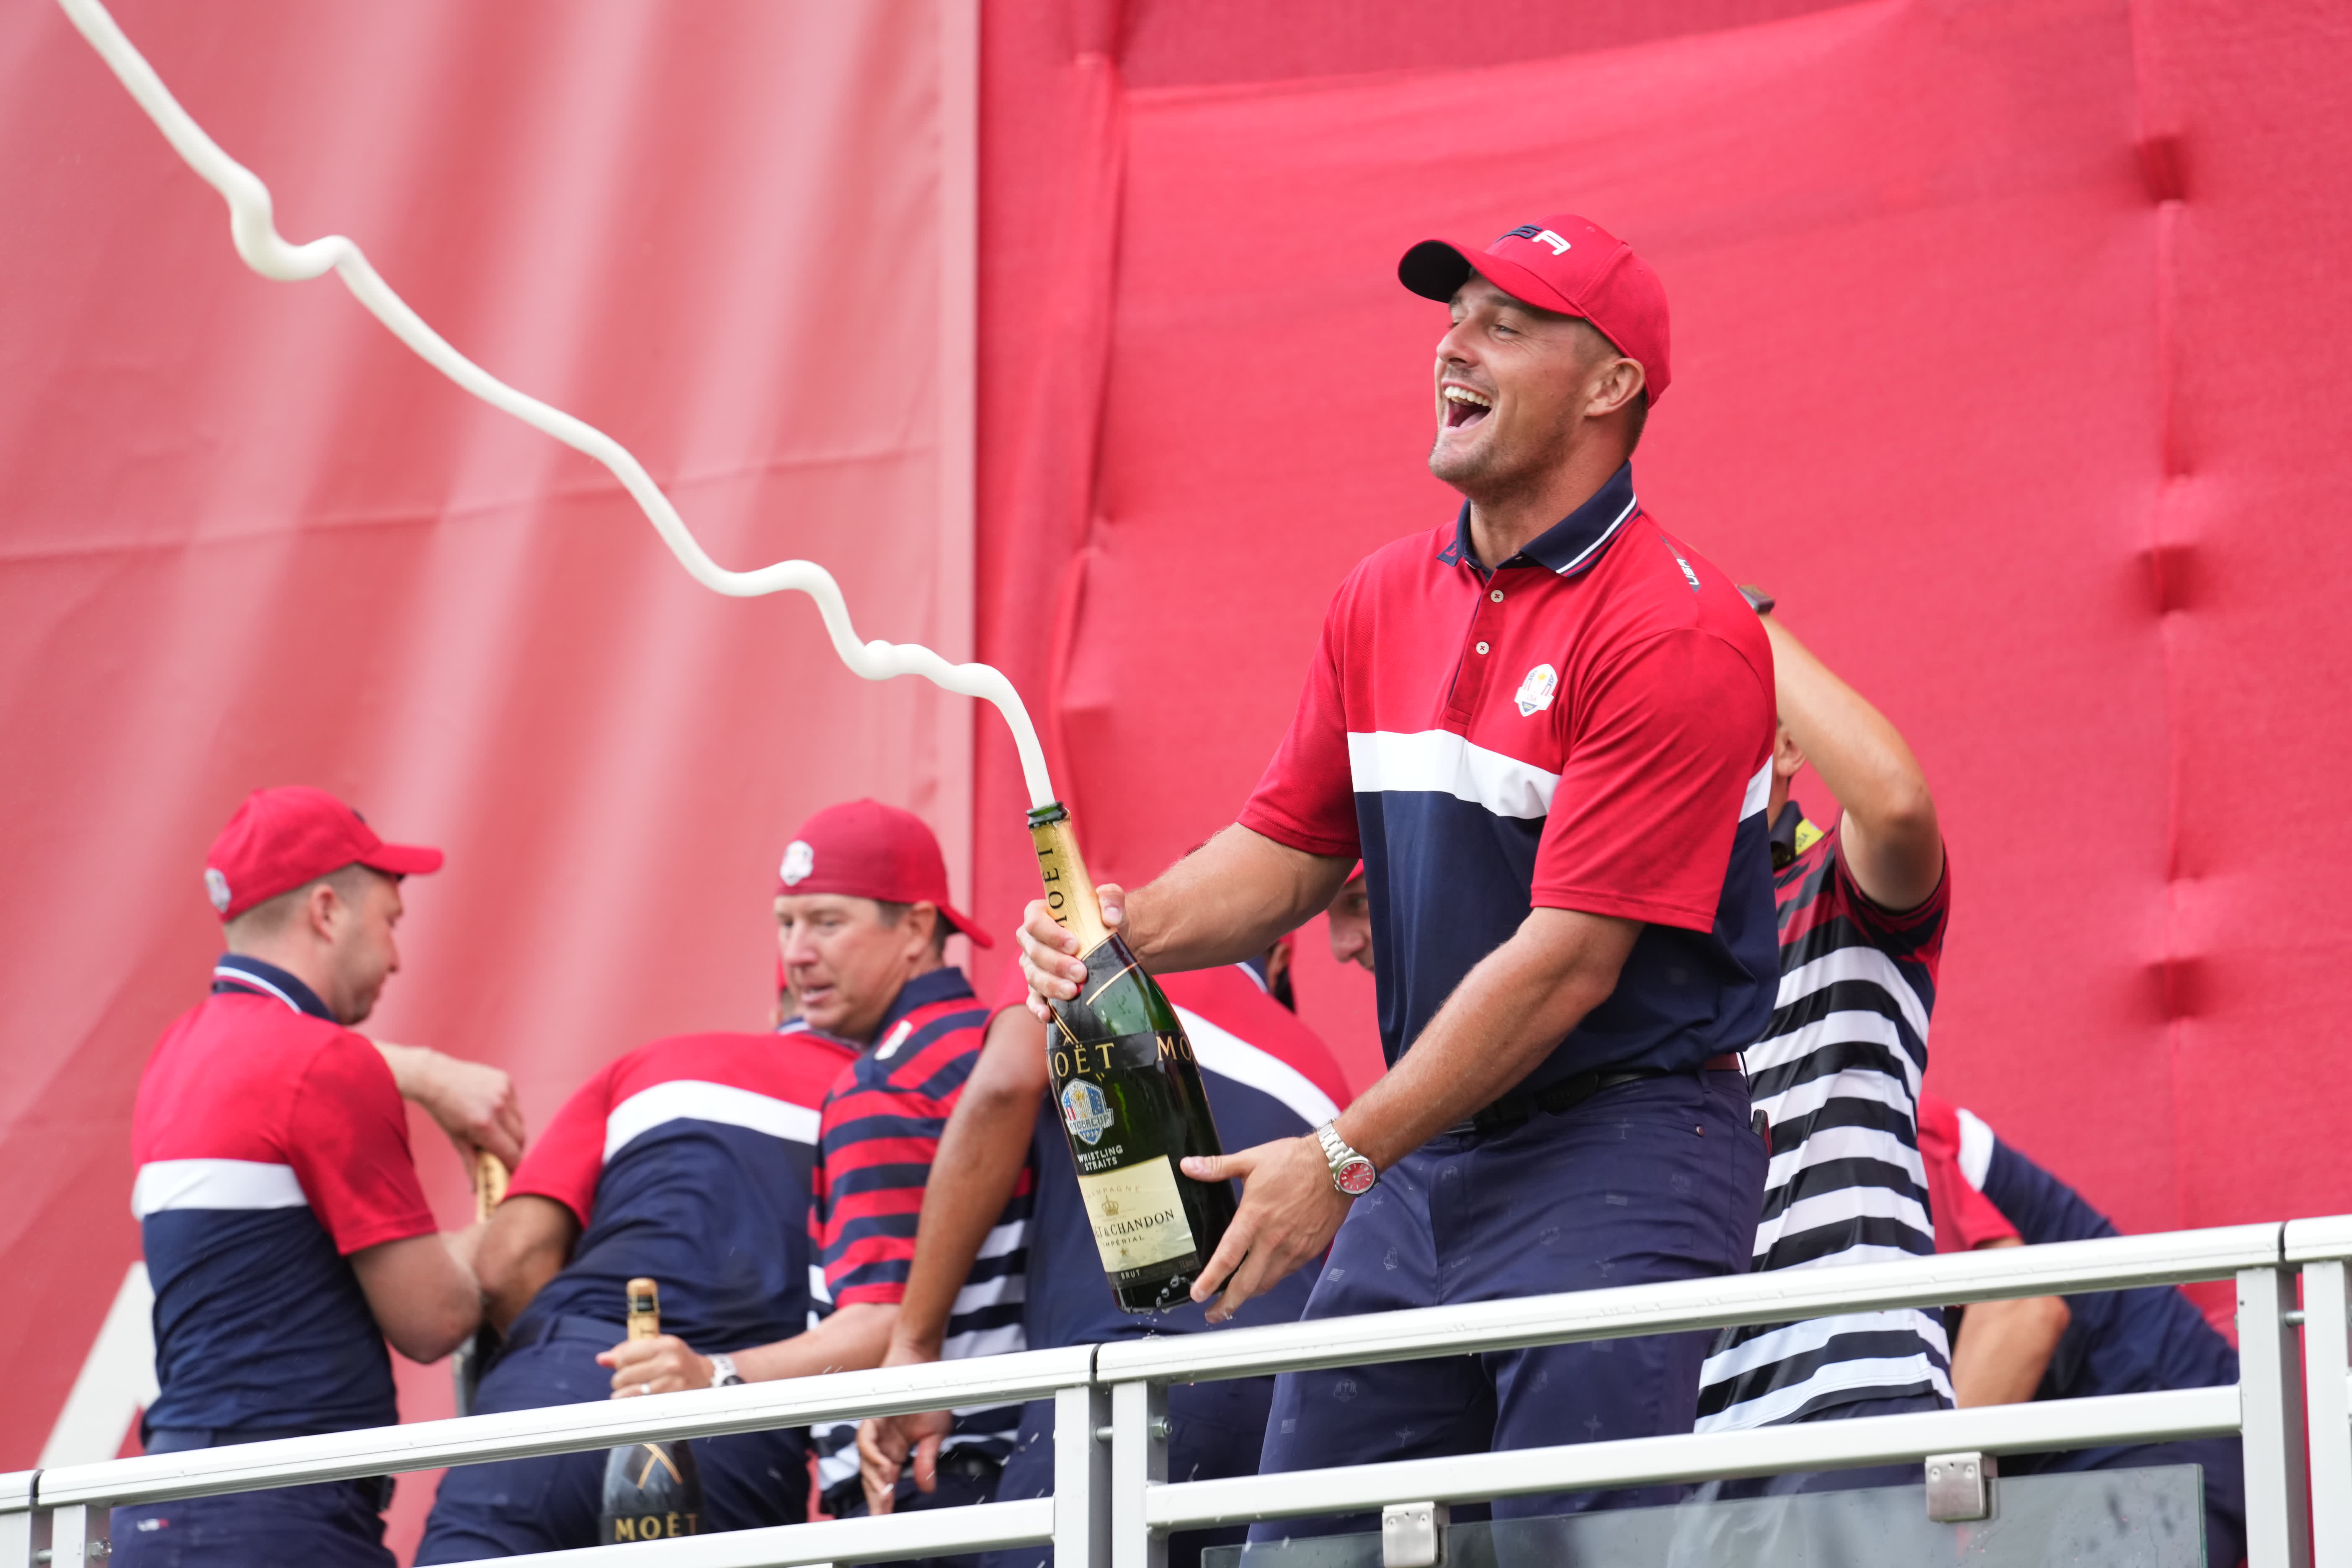 Ryder Cup 2020: Europe humiliated as Team USA cruise to history-making victory at Whistling Straits – CNBC